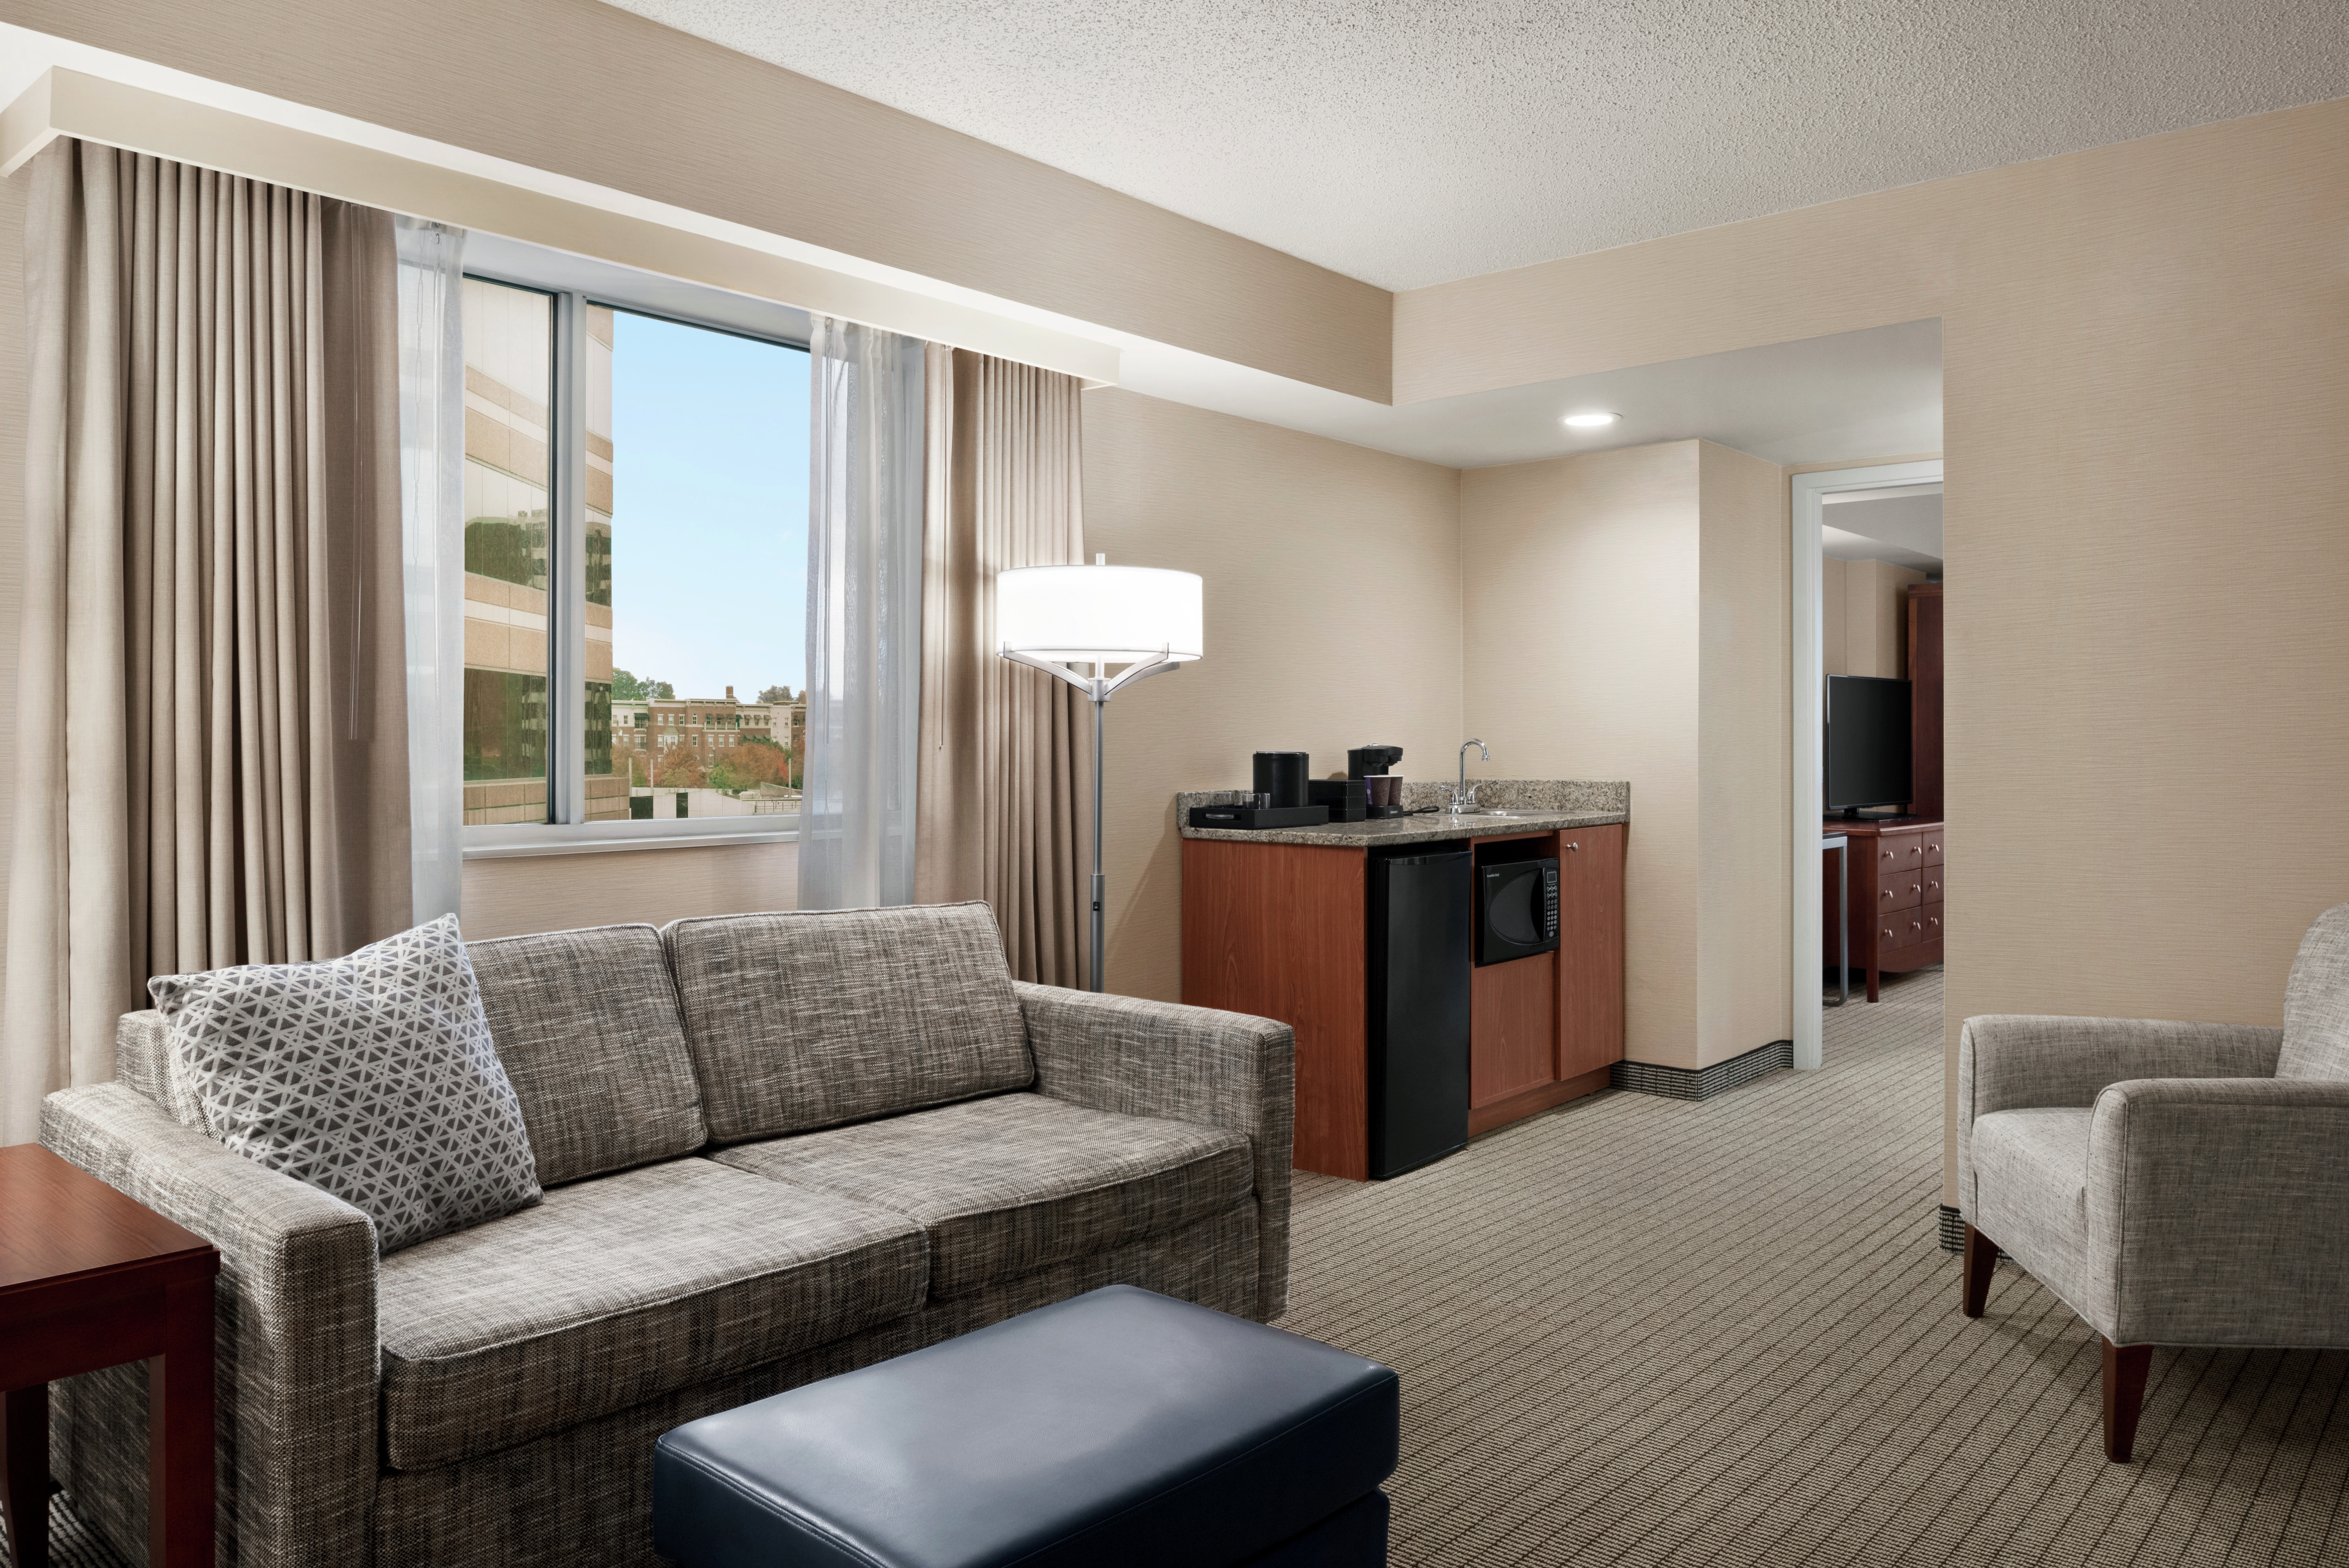 Executive Suite with Lounge Area, Faucet, and Room Technology